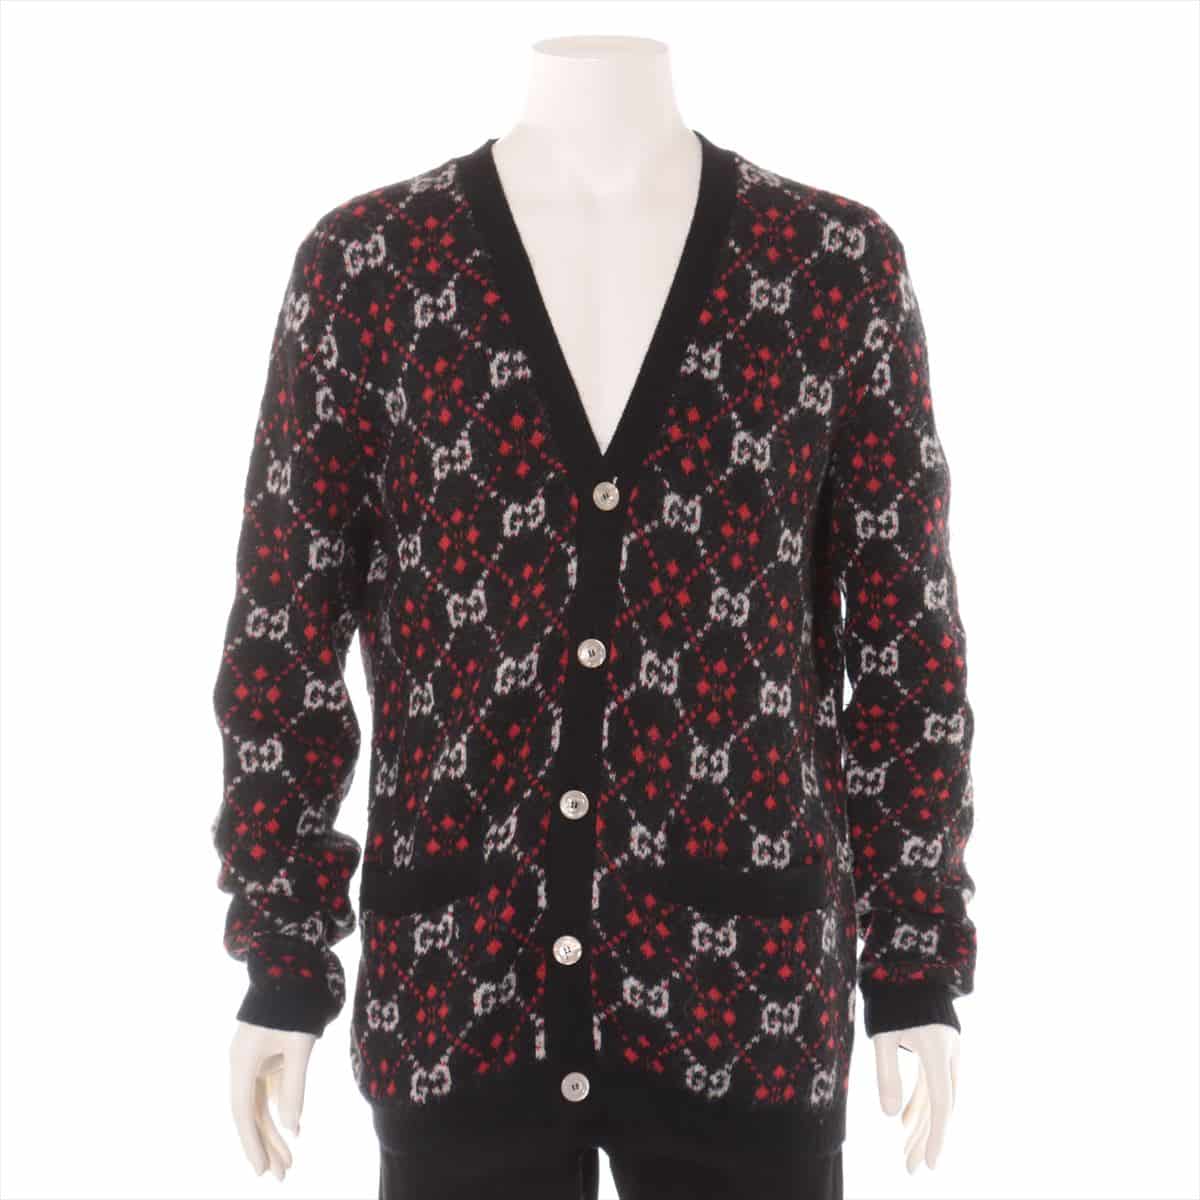 Gucci GG jacquard Alpaca Cardigan S Men's Red x Black  There are pilling balls on the whole